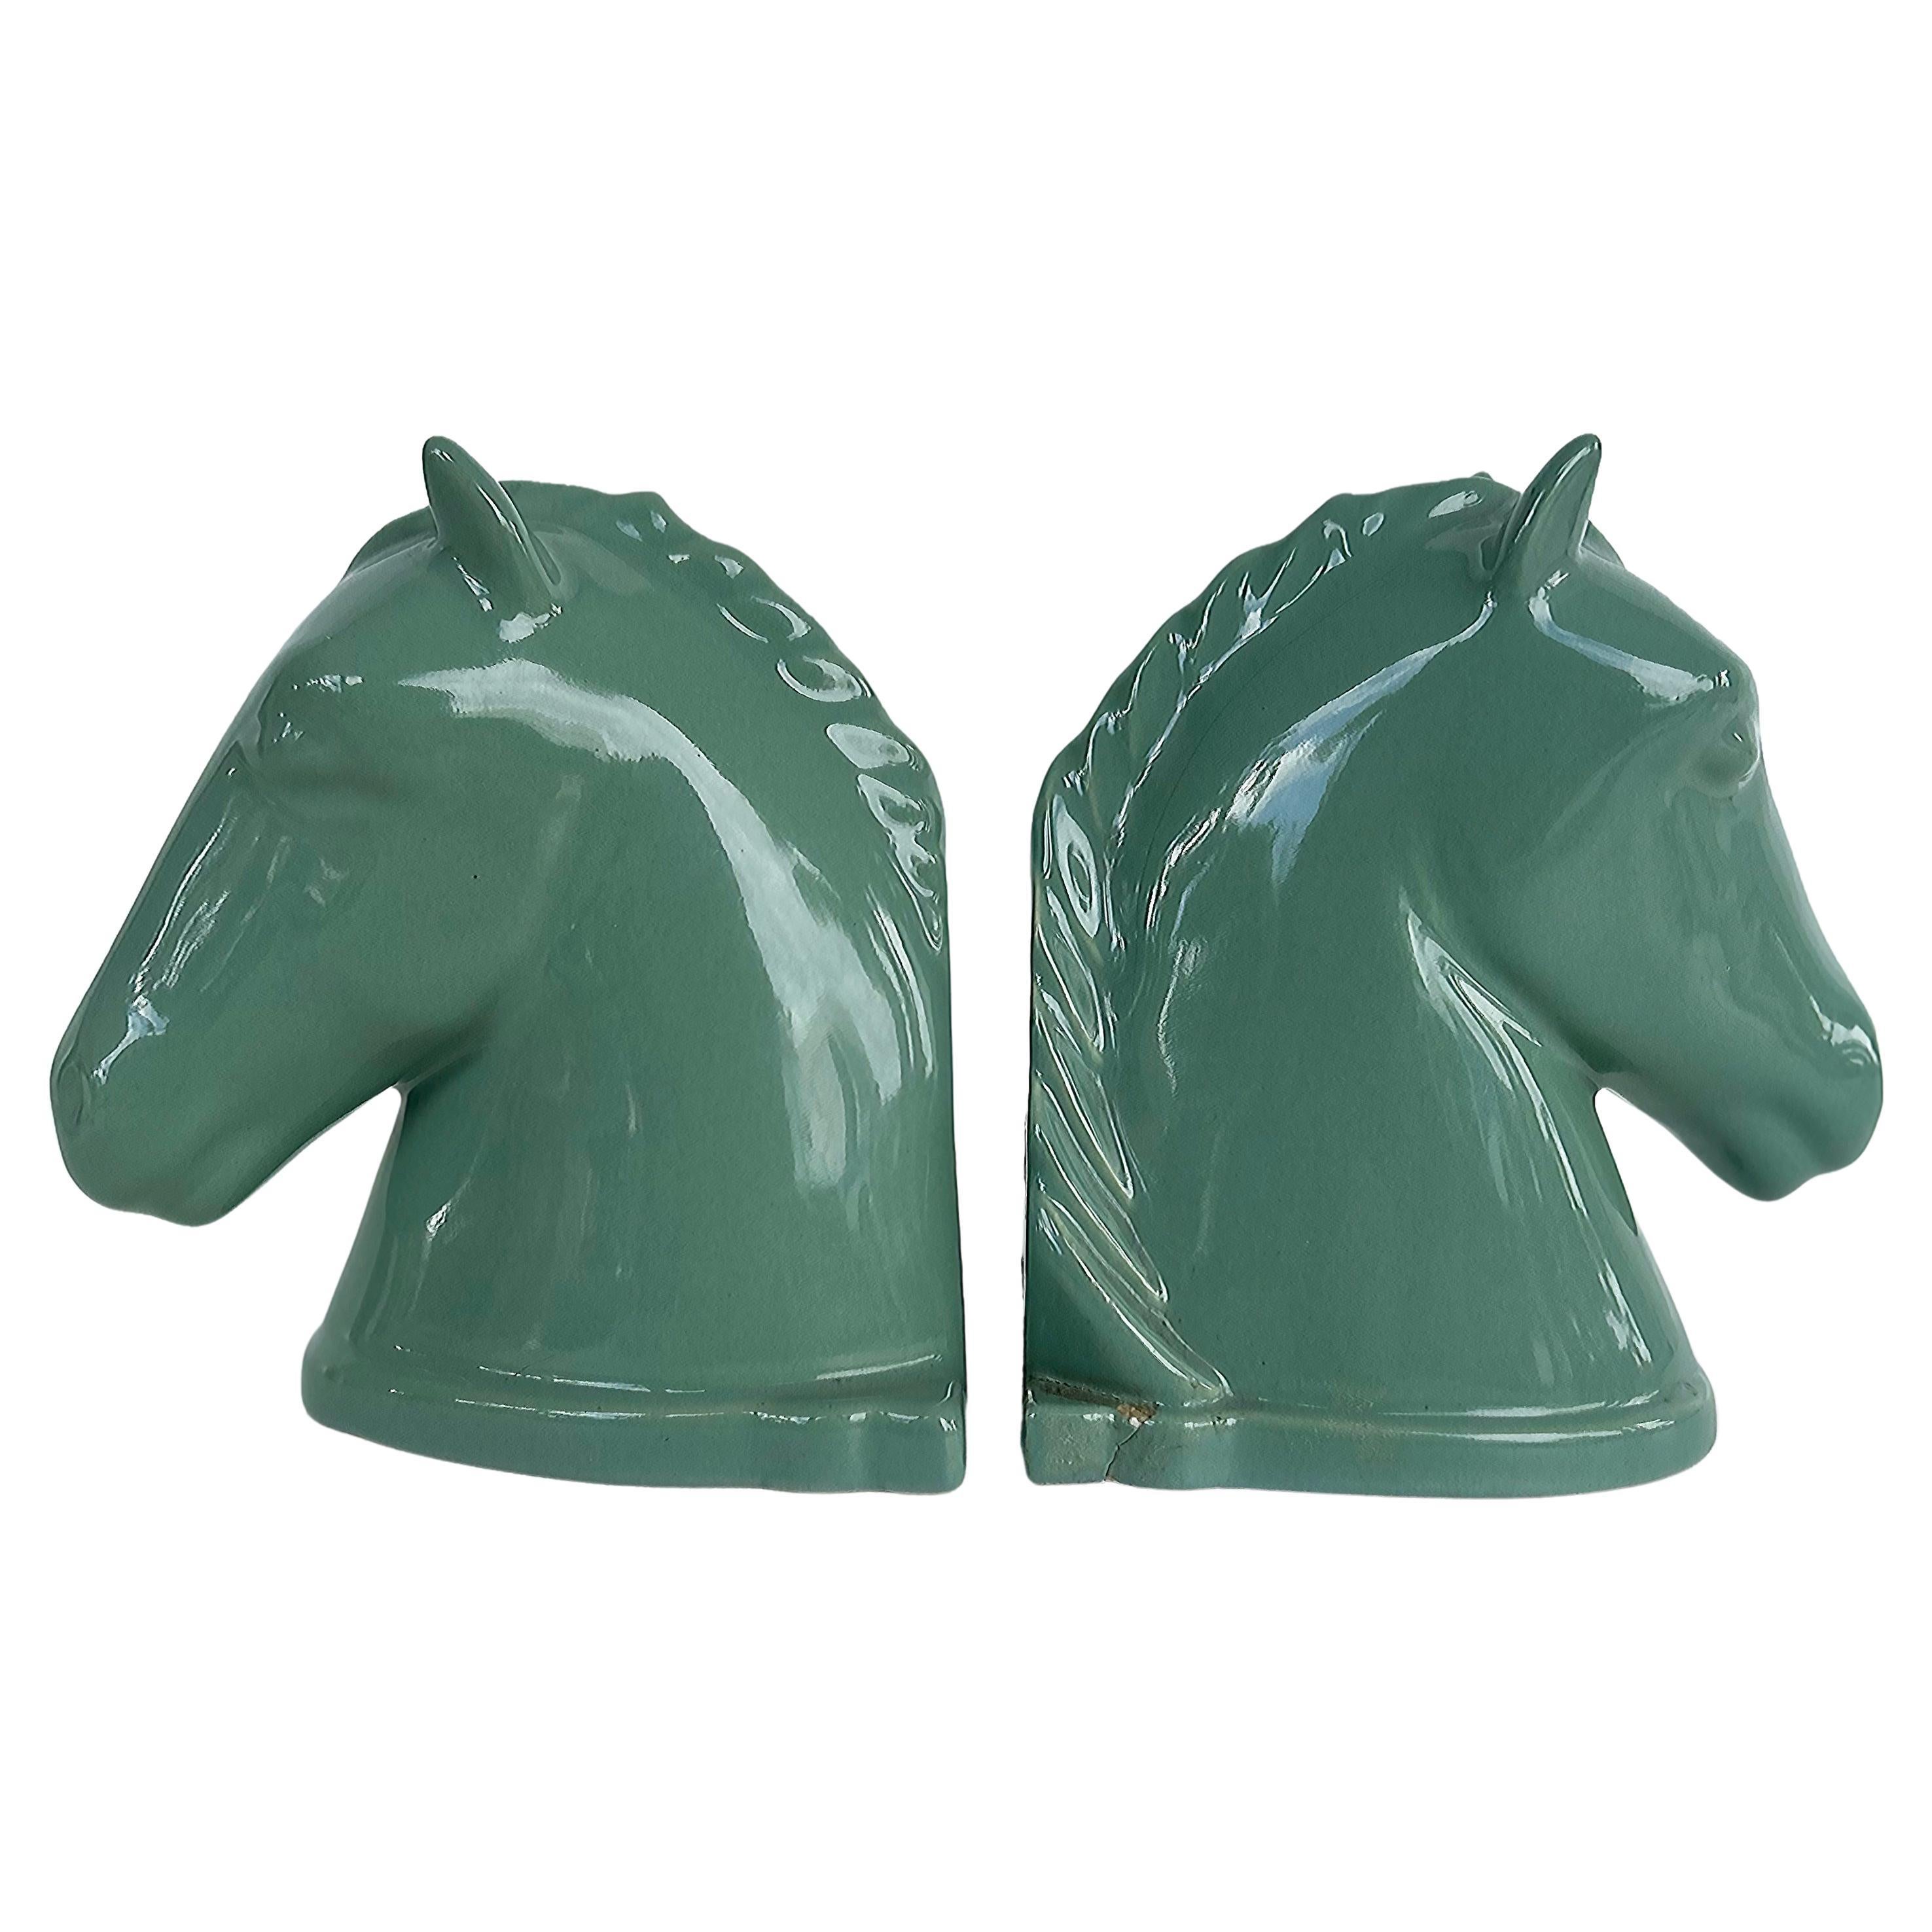 Vintage Abingdon USA Ceramic Horse Head Bookends with Labels, Pair  For Sale